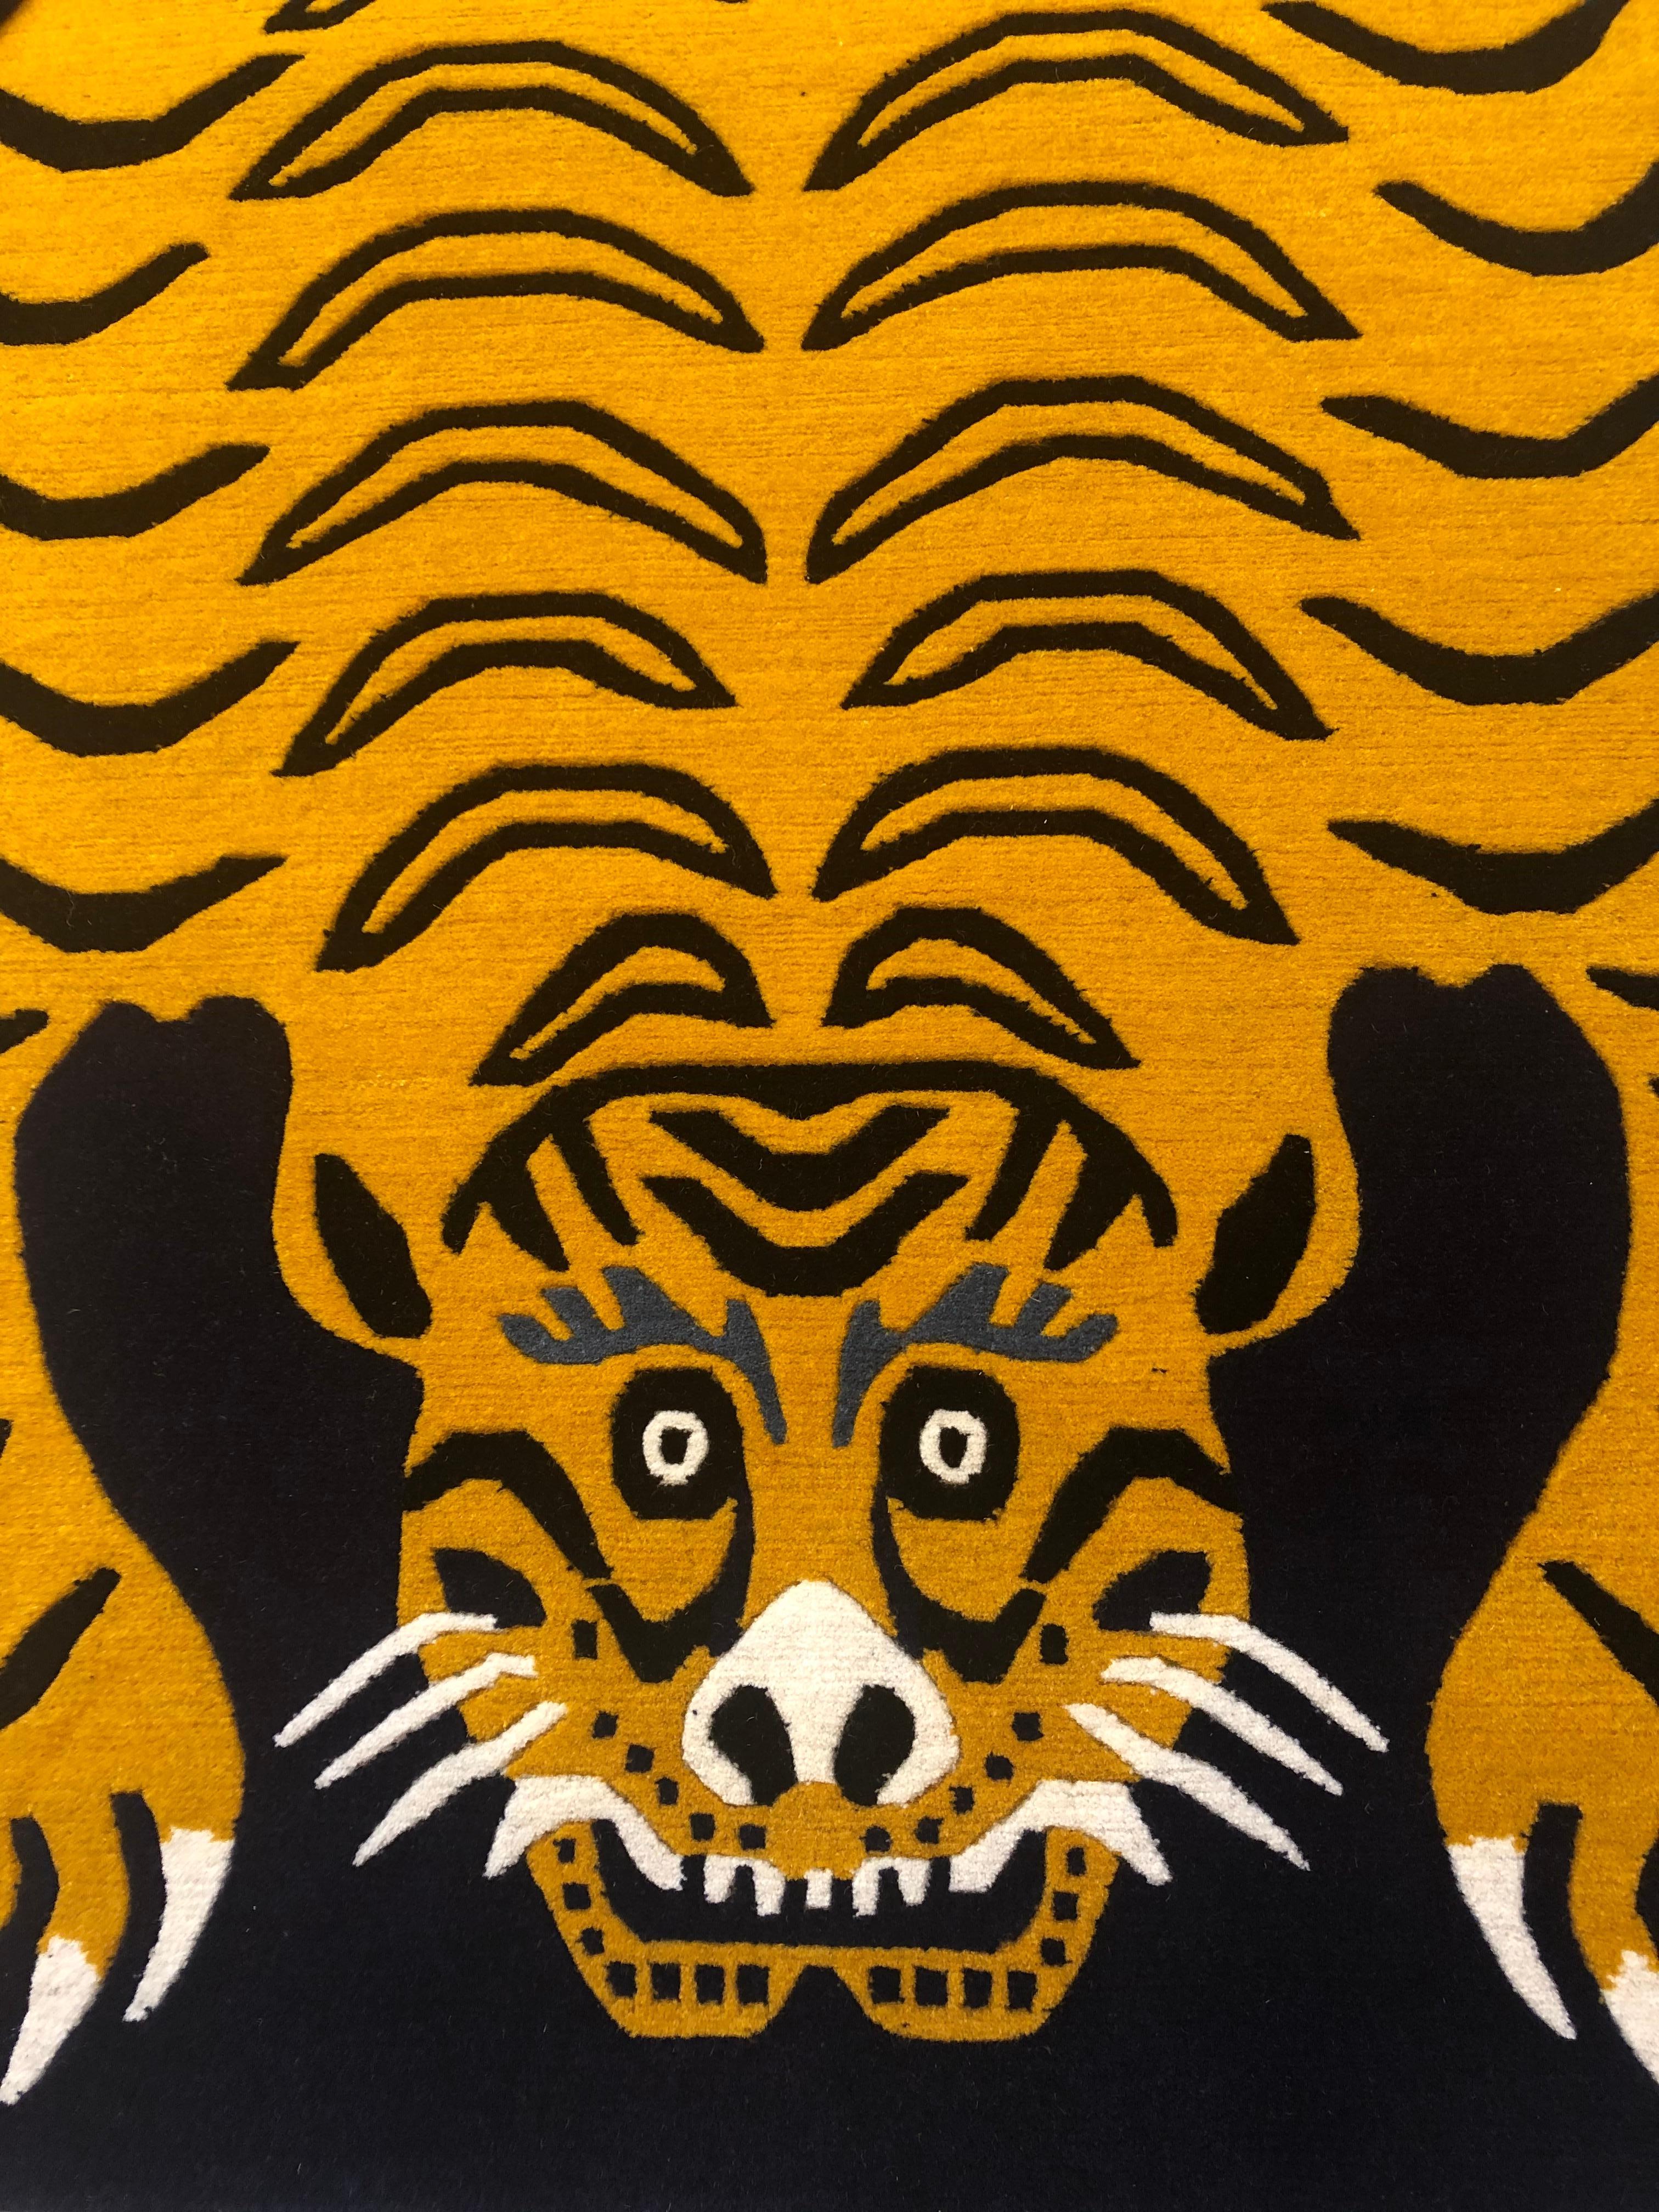 Carpet made of Nepal with hand-spun Himalayan wool and Tibetan knot. The background is midnight blue and the tiger represented has the back richly decorated in the traditional ocher yellow of the fur of these felines. The face expresses strength but